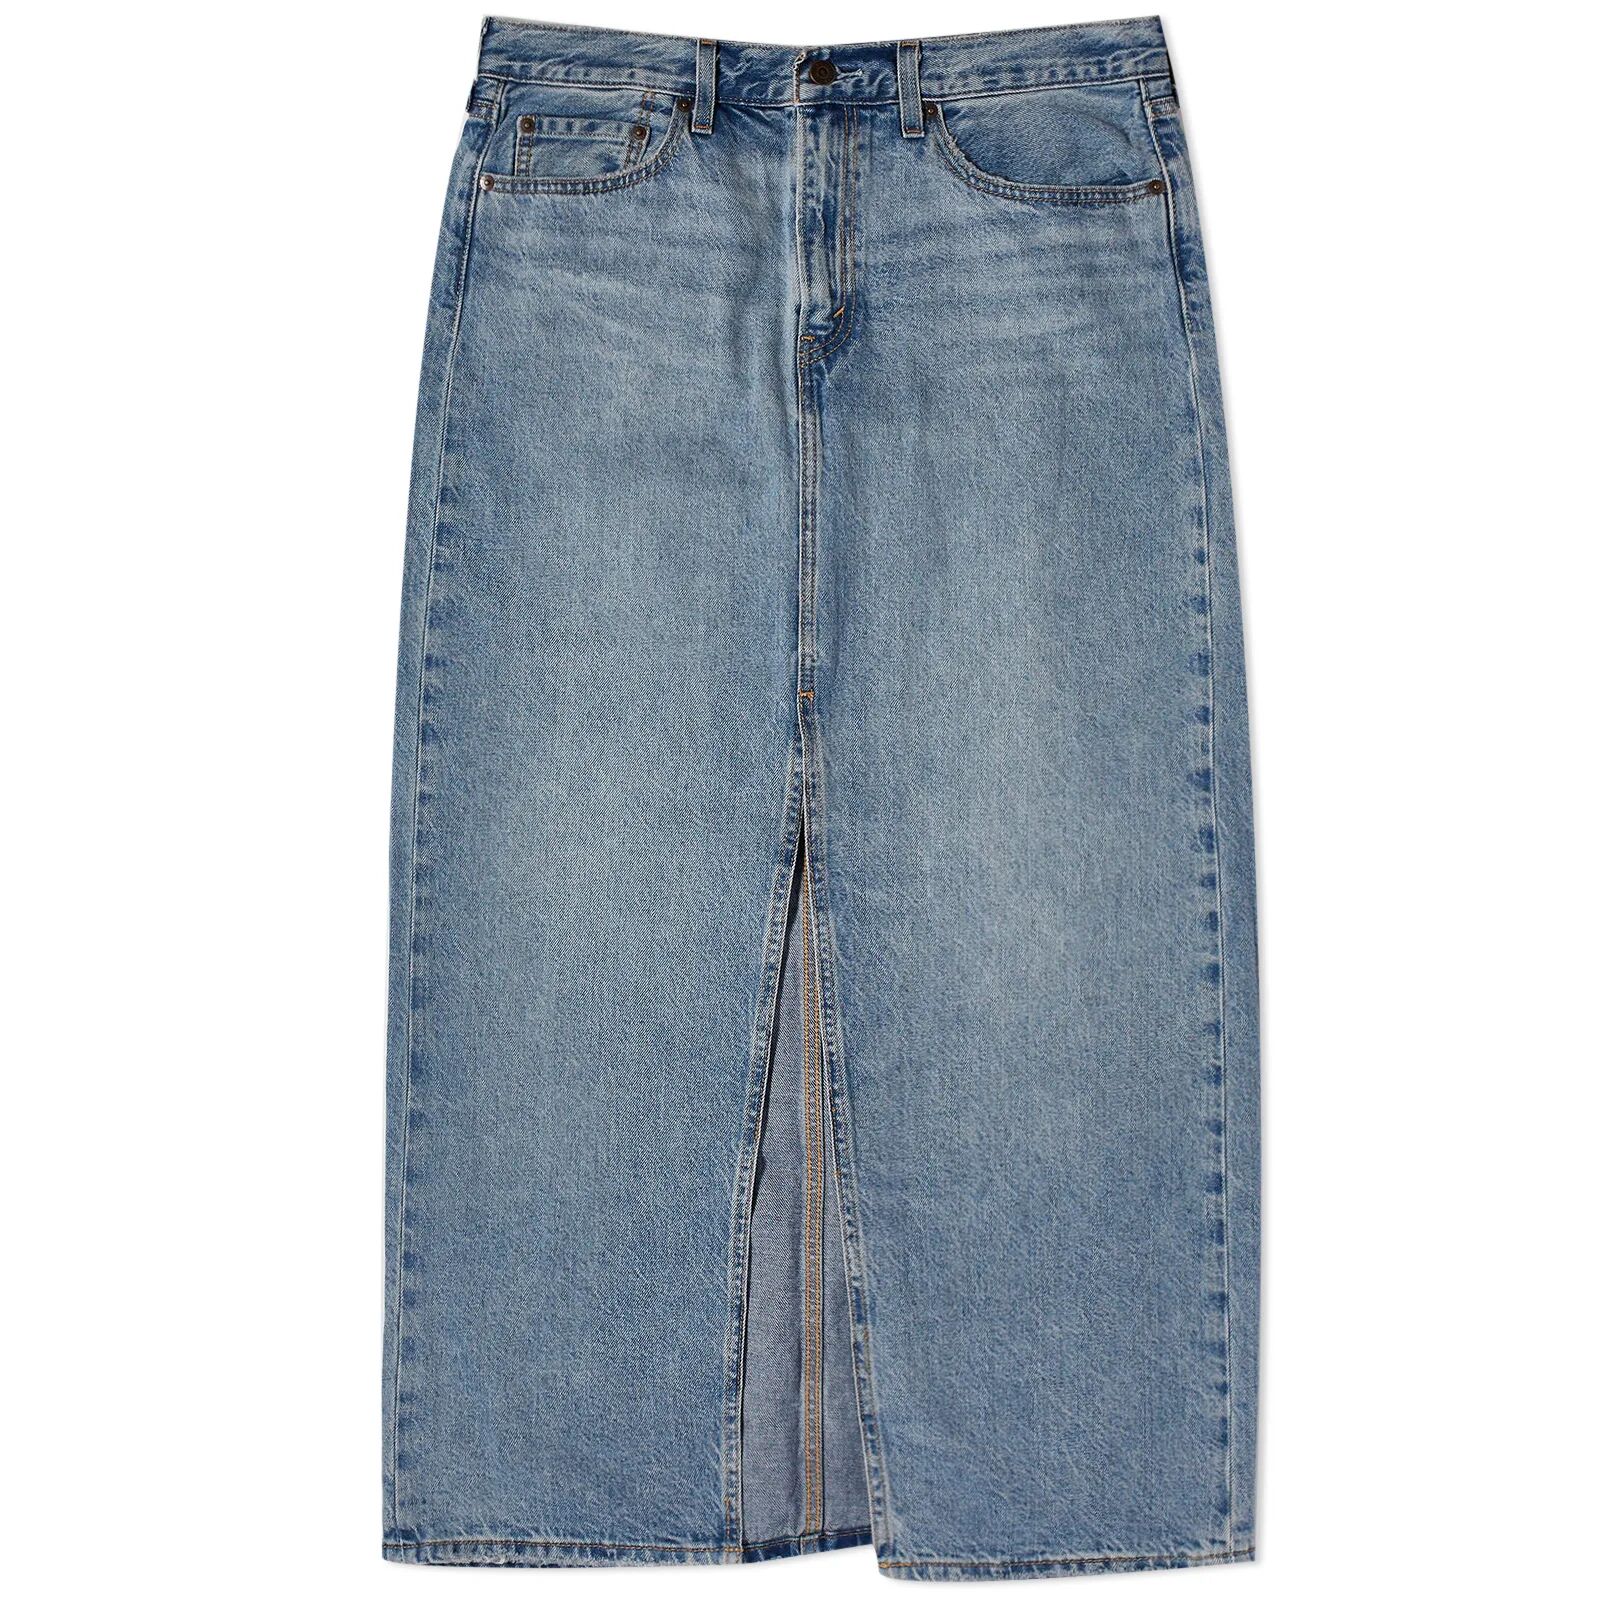 Levi’s Collections Women's Levis Vintage Clothing Ankle Column Skirt in Please Hold, Size 31"